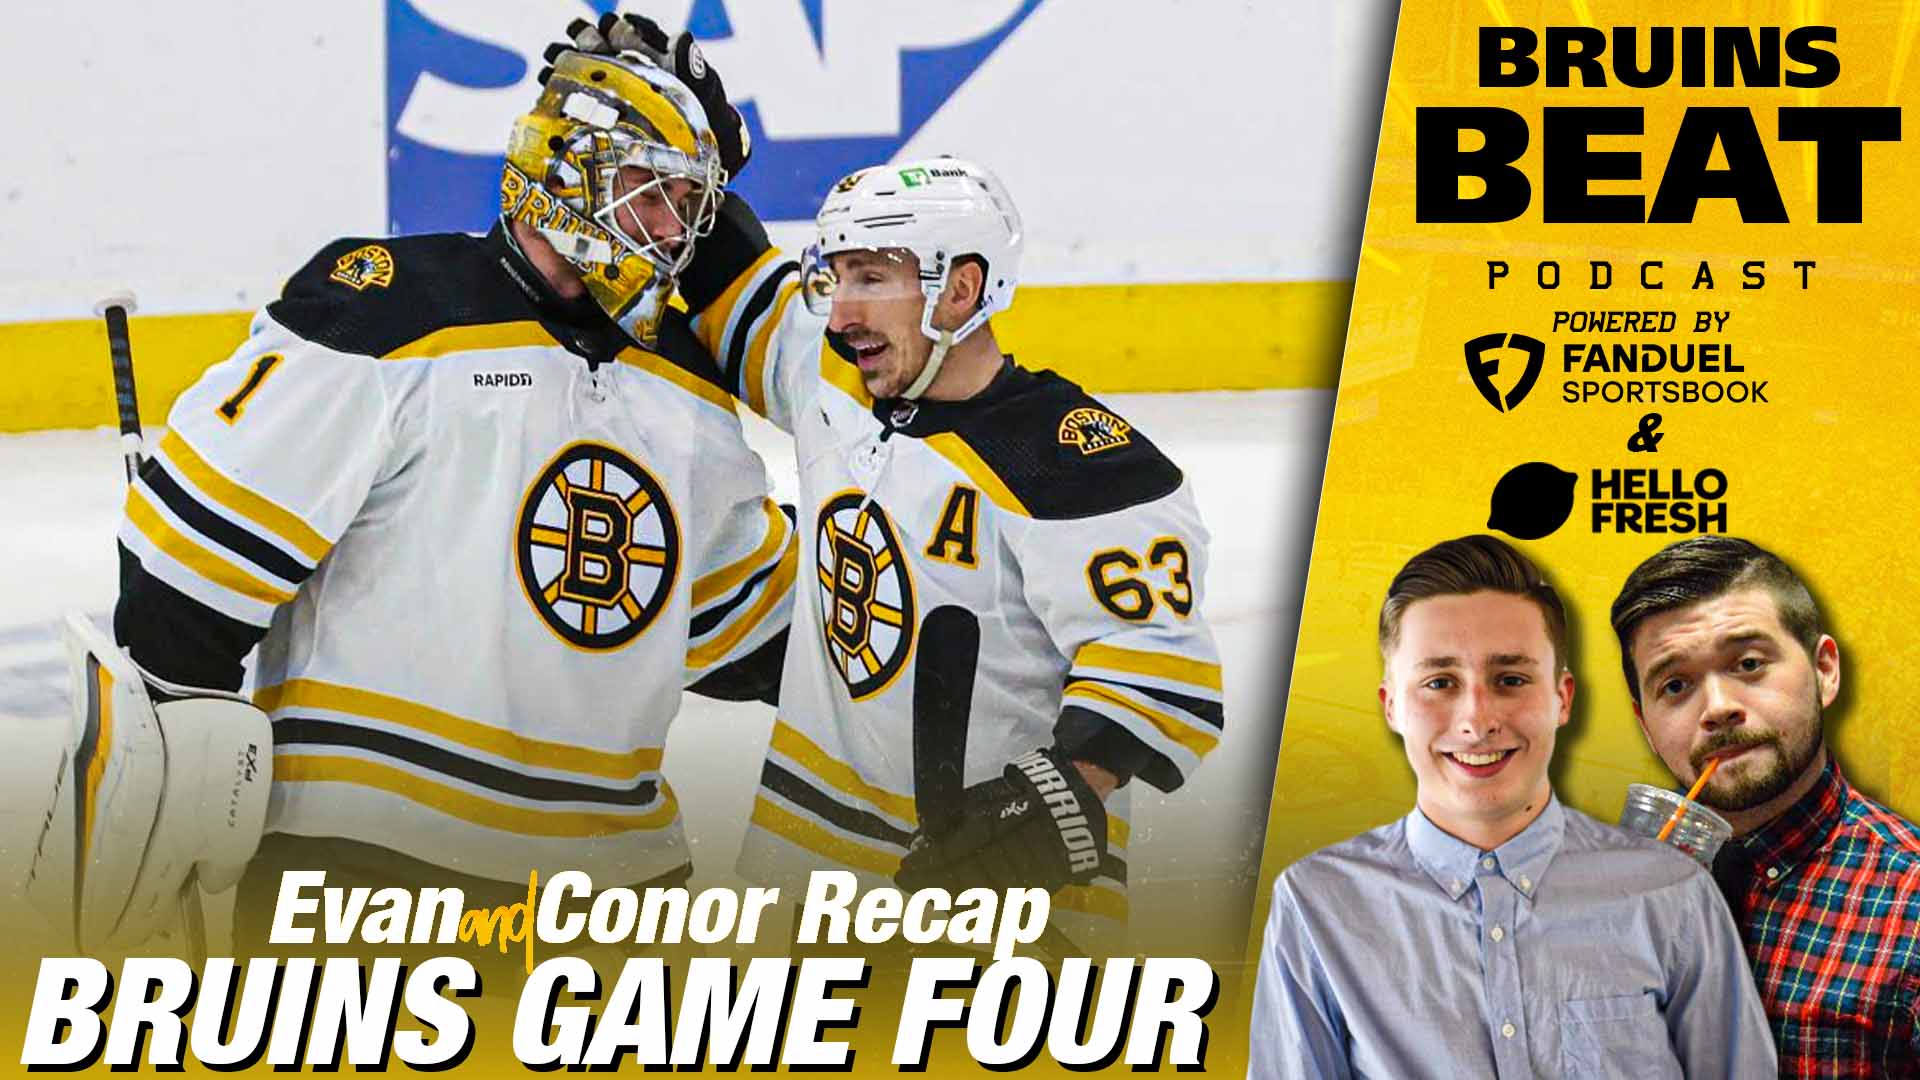 Play 'Predict The Game' During Bruins-Panthers To Win Signed Brad